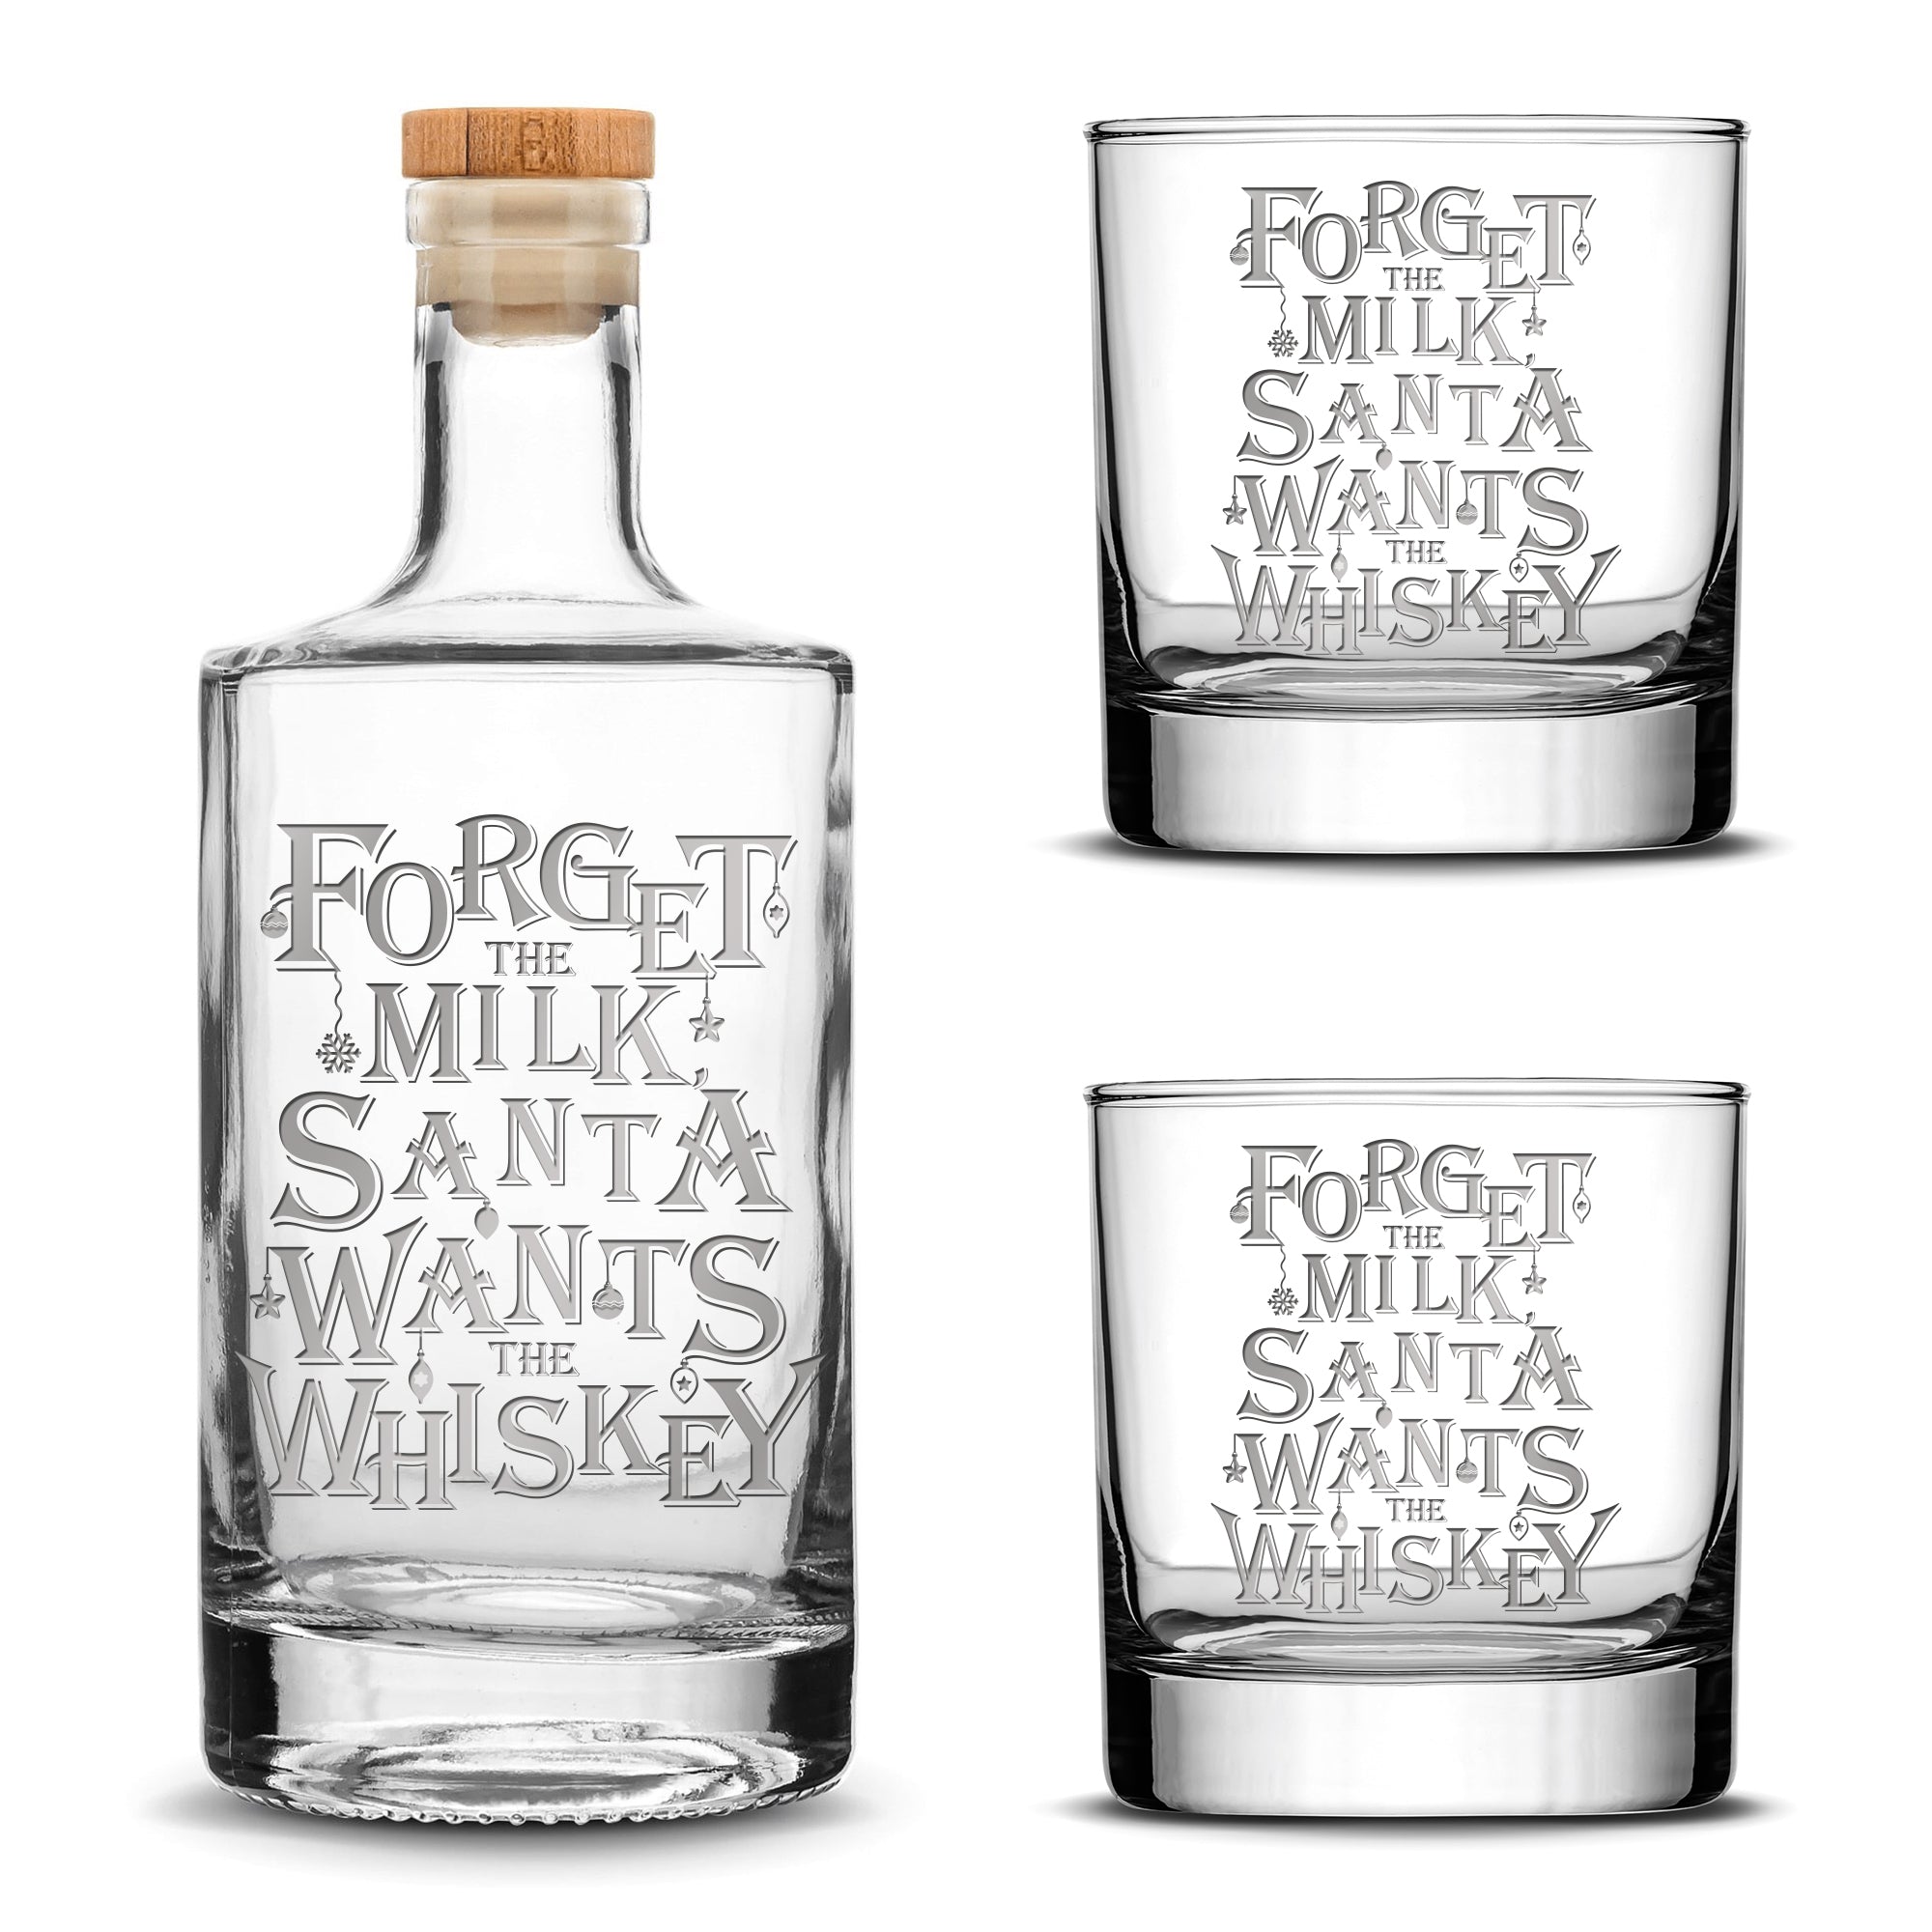 Santa Wants The Whiskey Jersey Bottle Set with 2 Christmas Whiskey Glasses